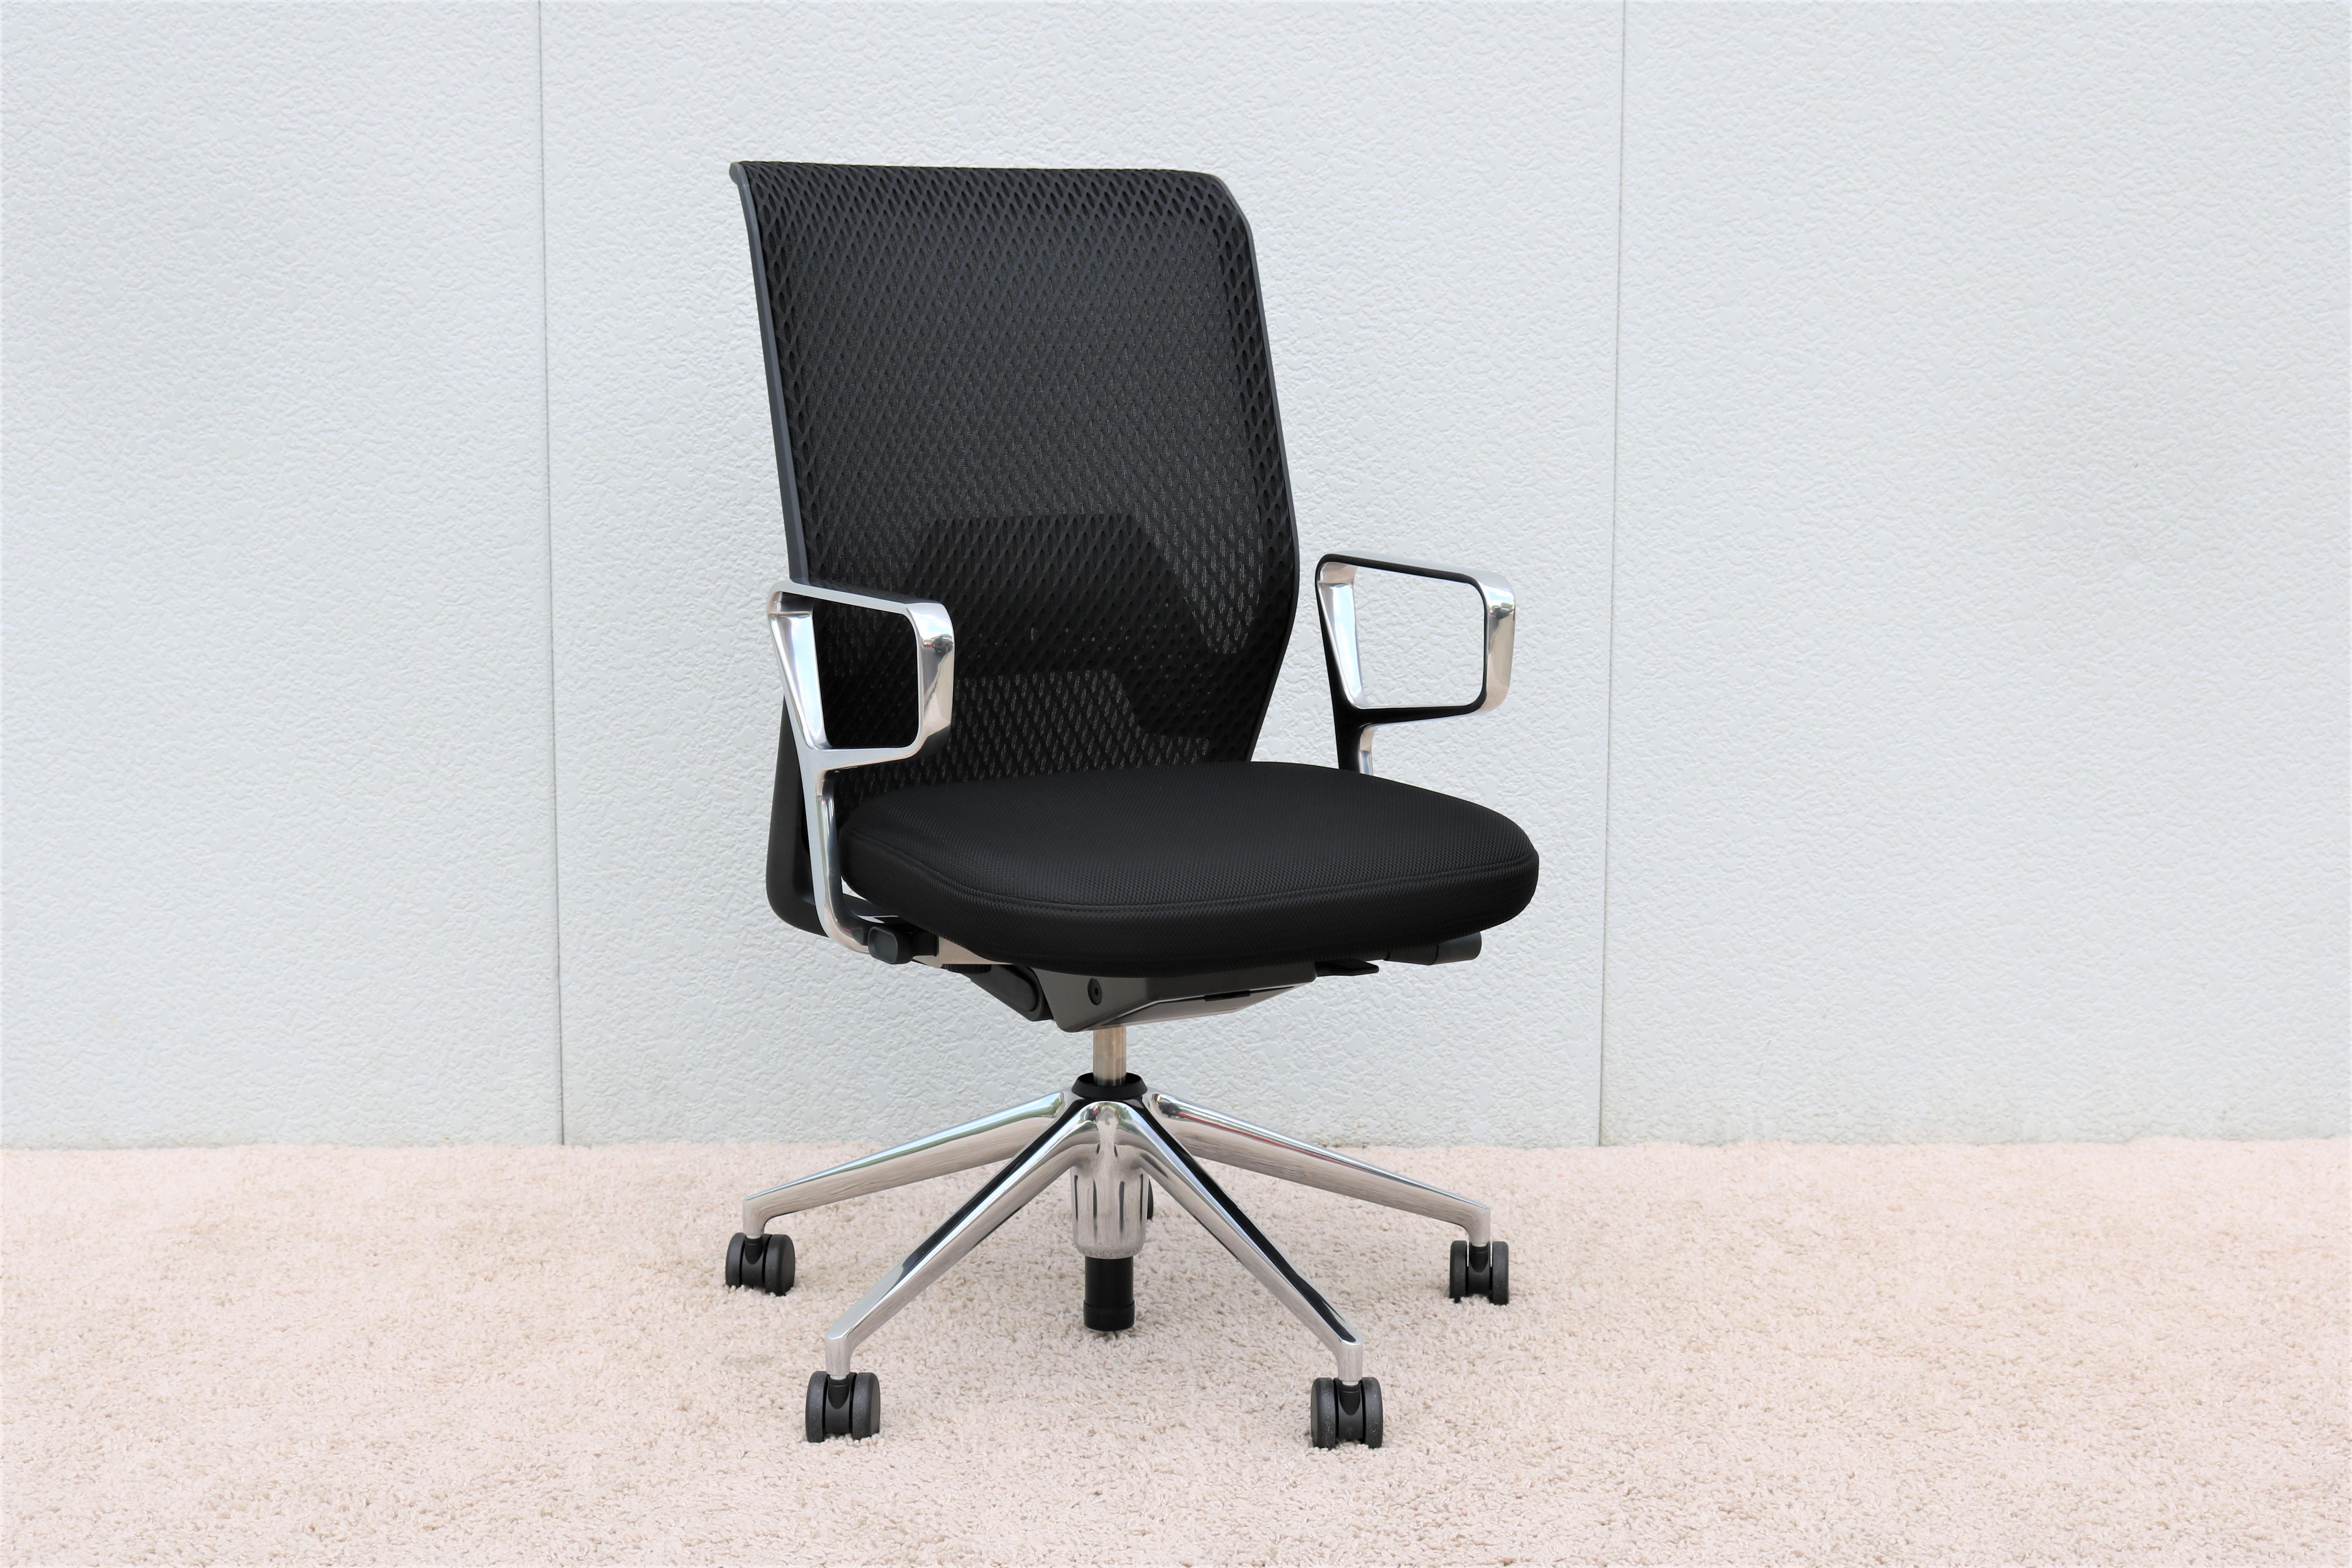 The ergonomic ID mesh office desk chair designed by Antonio Citterio for Vitra successfully combines comfort, technology, and elegance. 
Features a soft seat and supportive backrest mesh that allows air to circulate and offers sustained comfort.